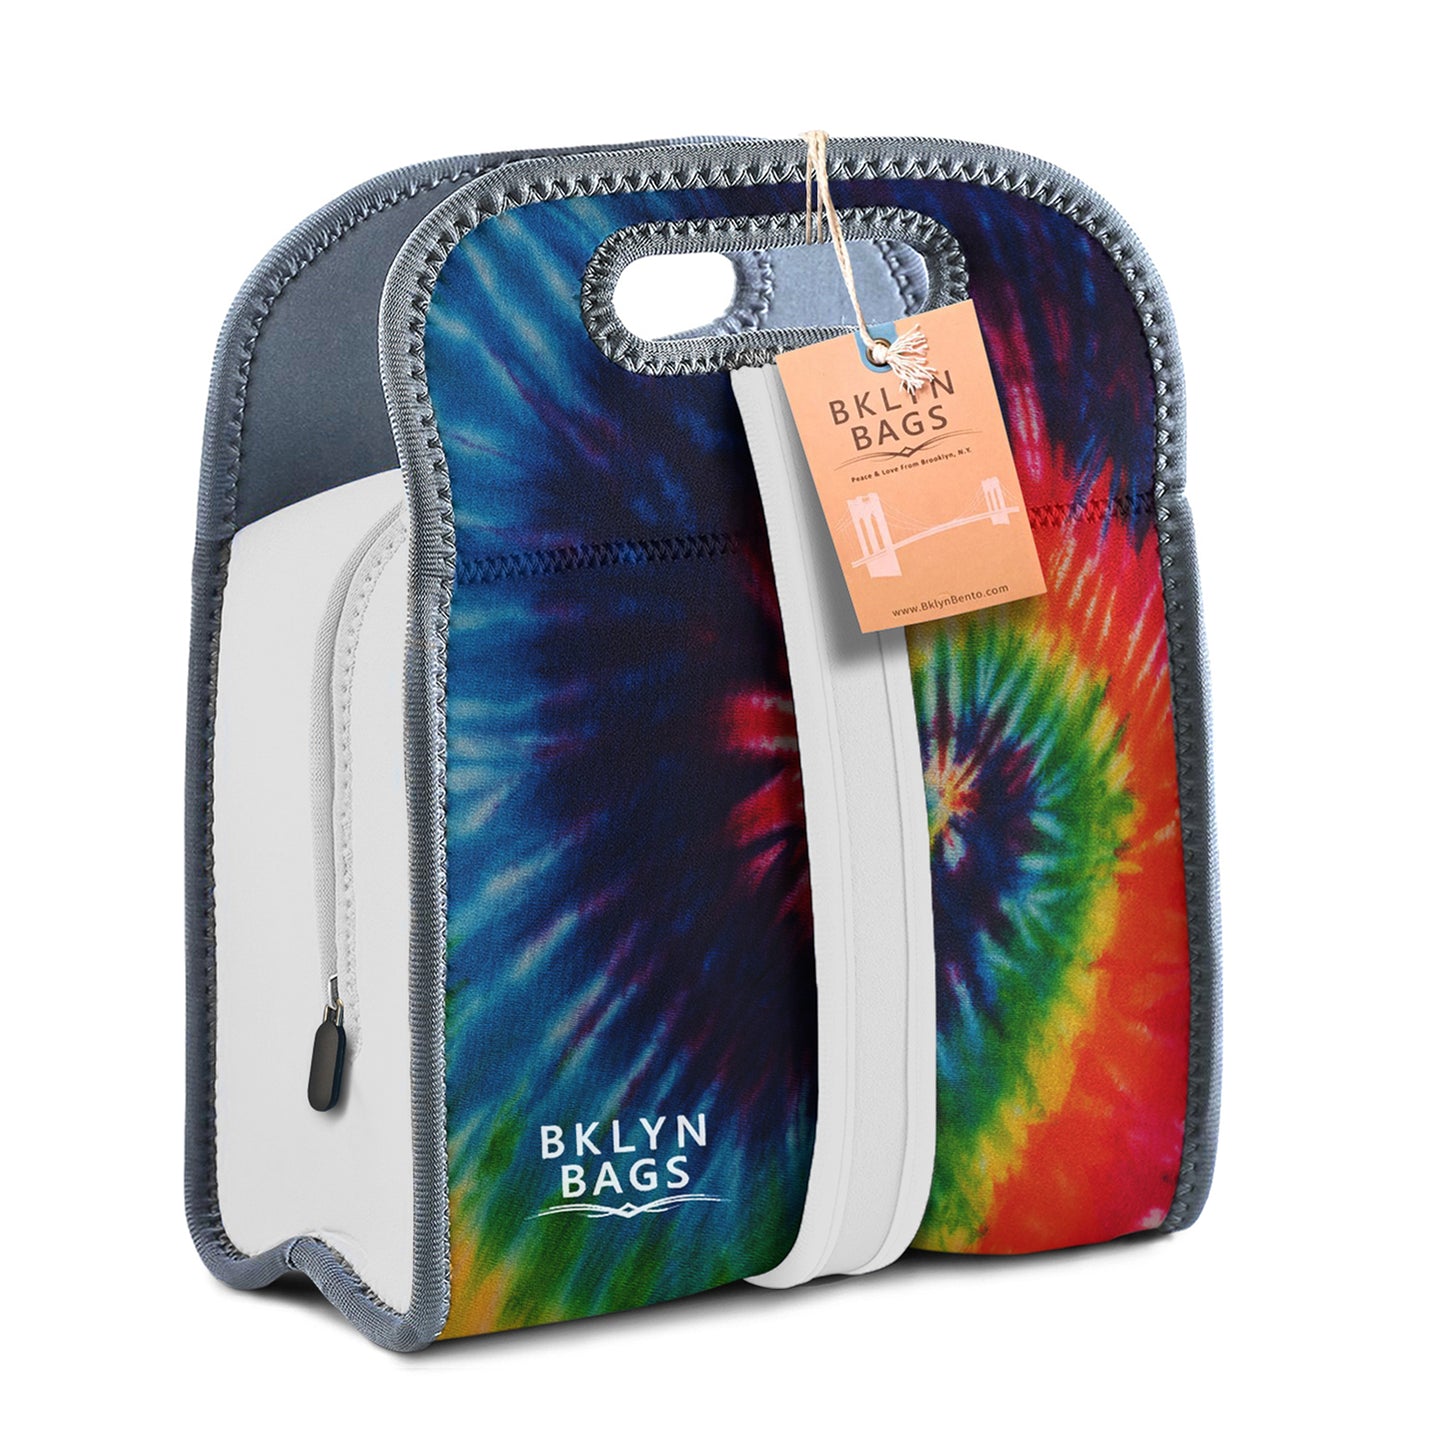 Bklyn Bento Insulated Lunch Bag (Tie Dye), Super Durable, Soft, Easy to Clean, Machine Washable